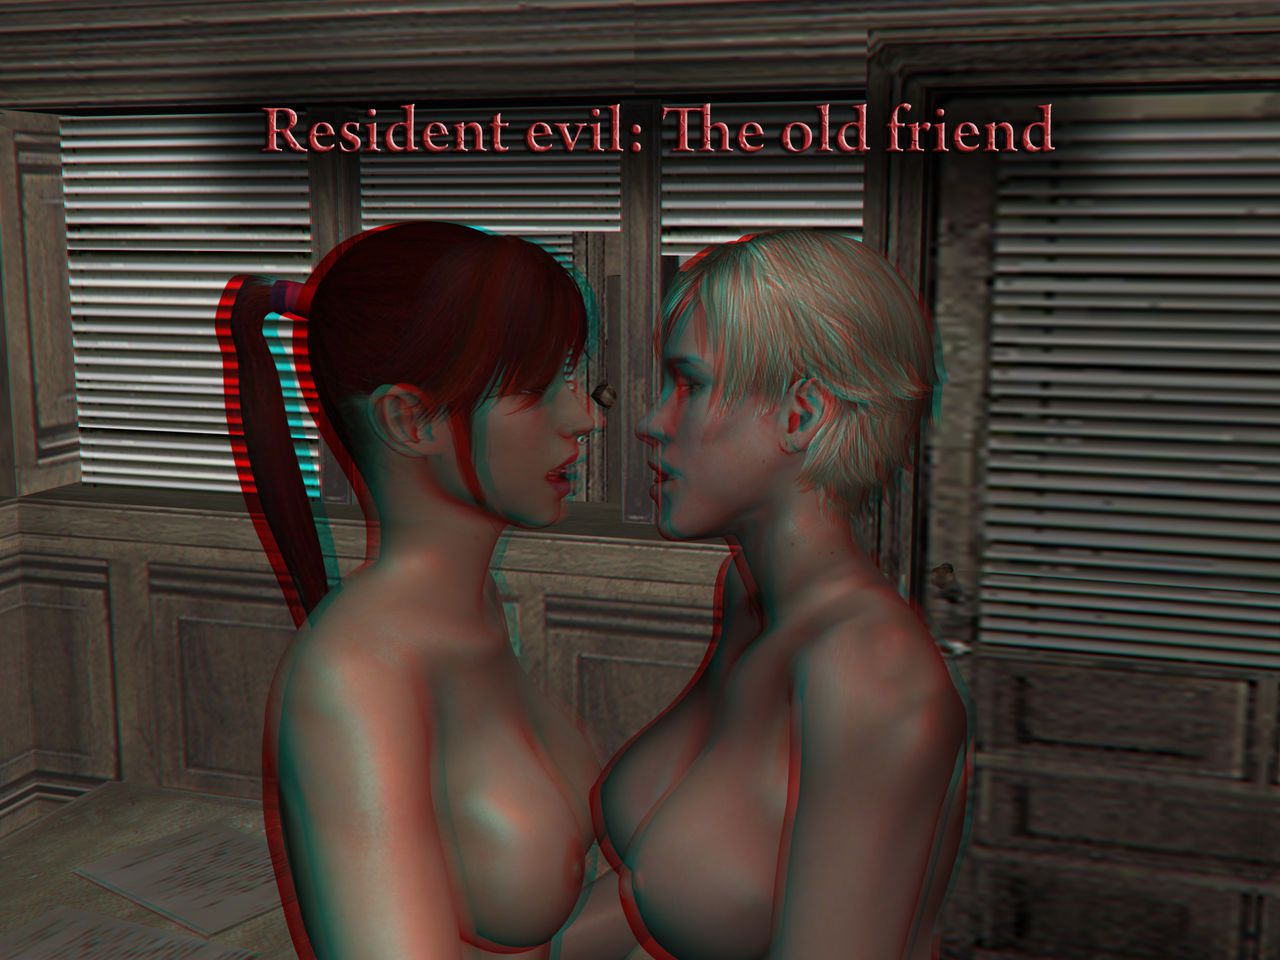 Resident evil: The old friend 28